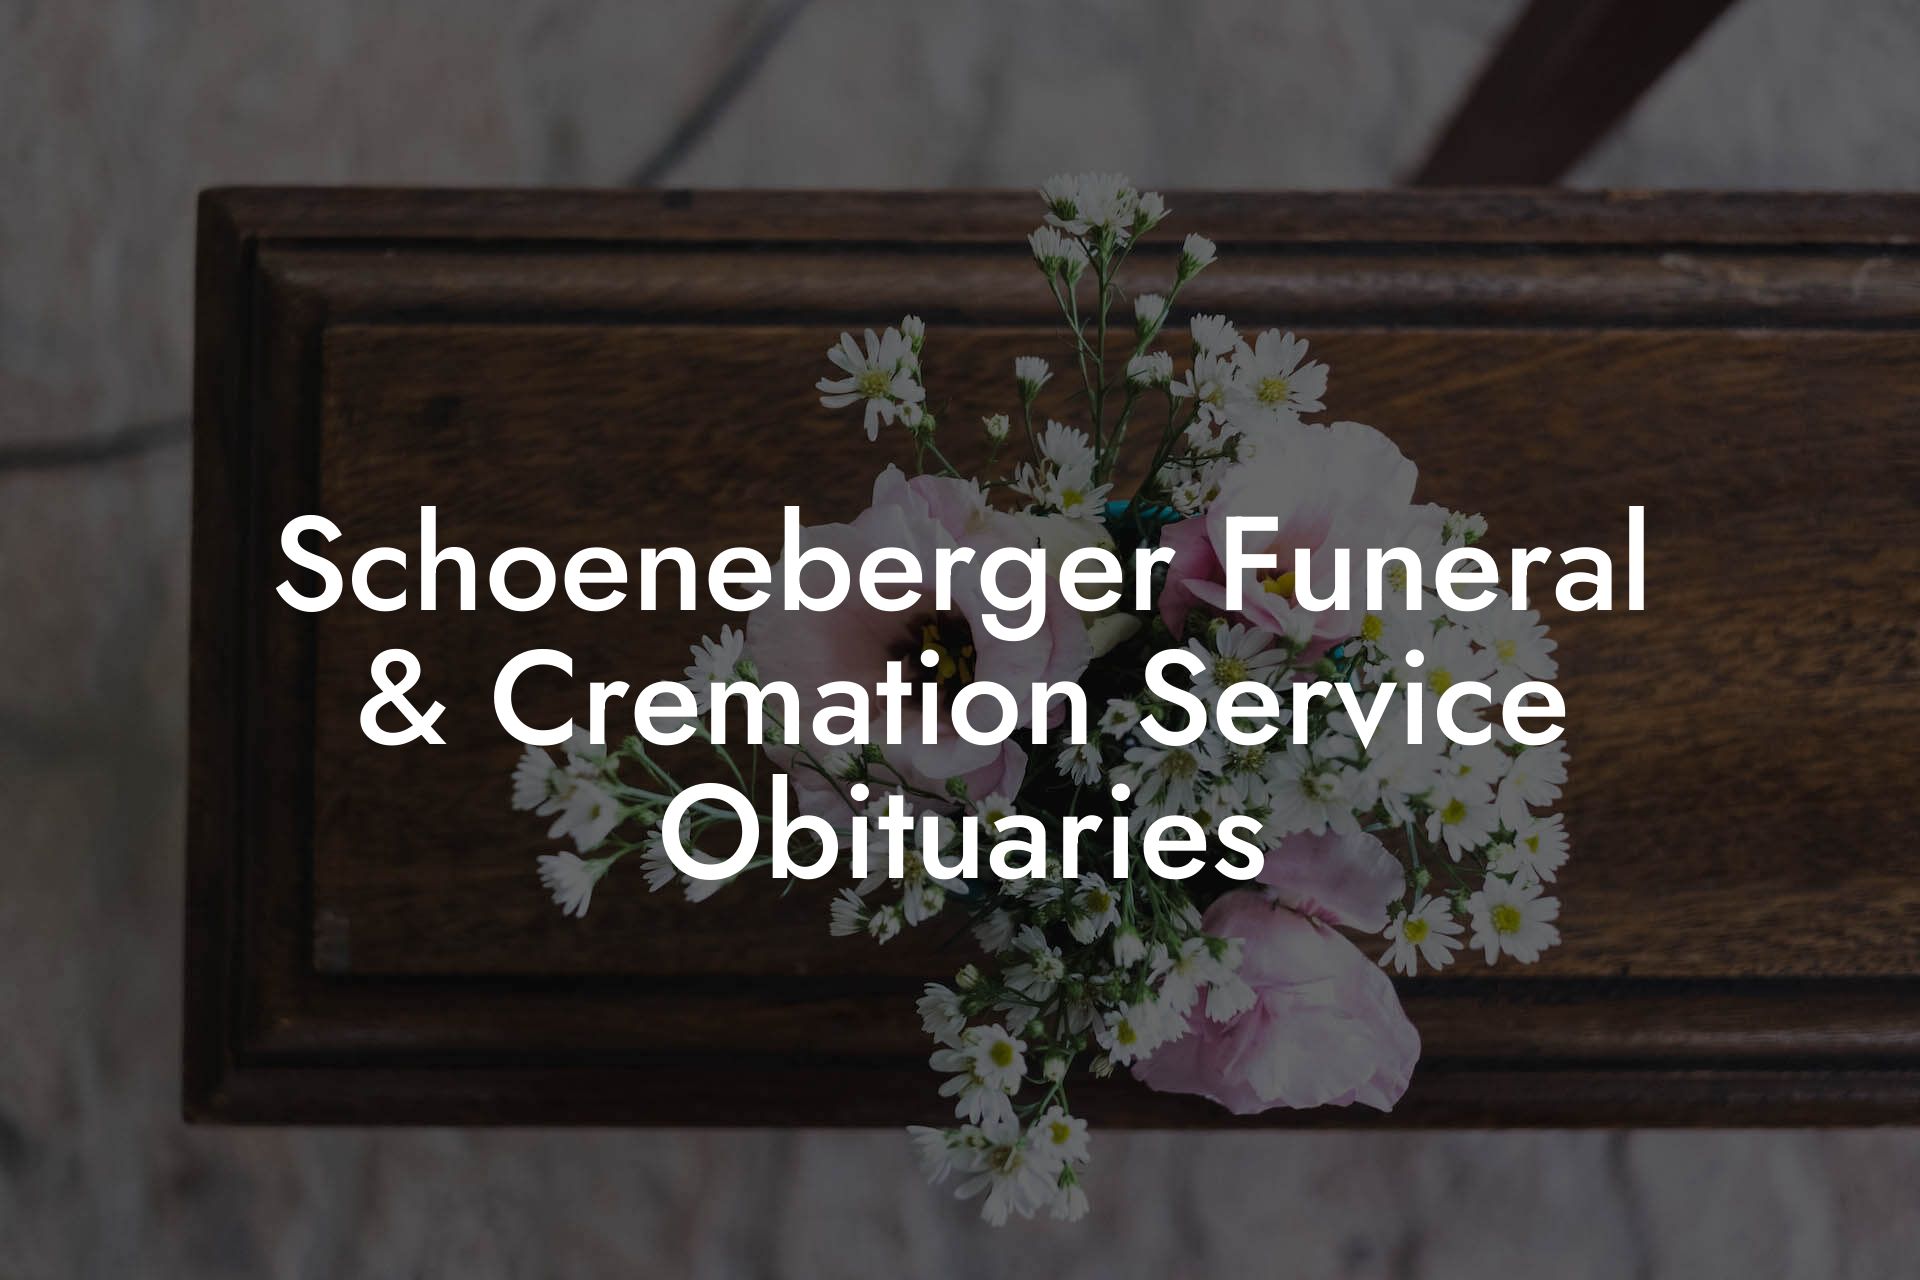 Schoeneberger Funeral & Cremation Service Obituaries